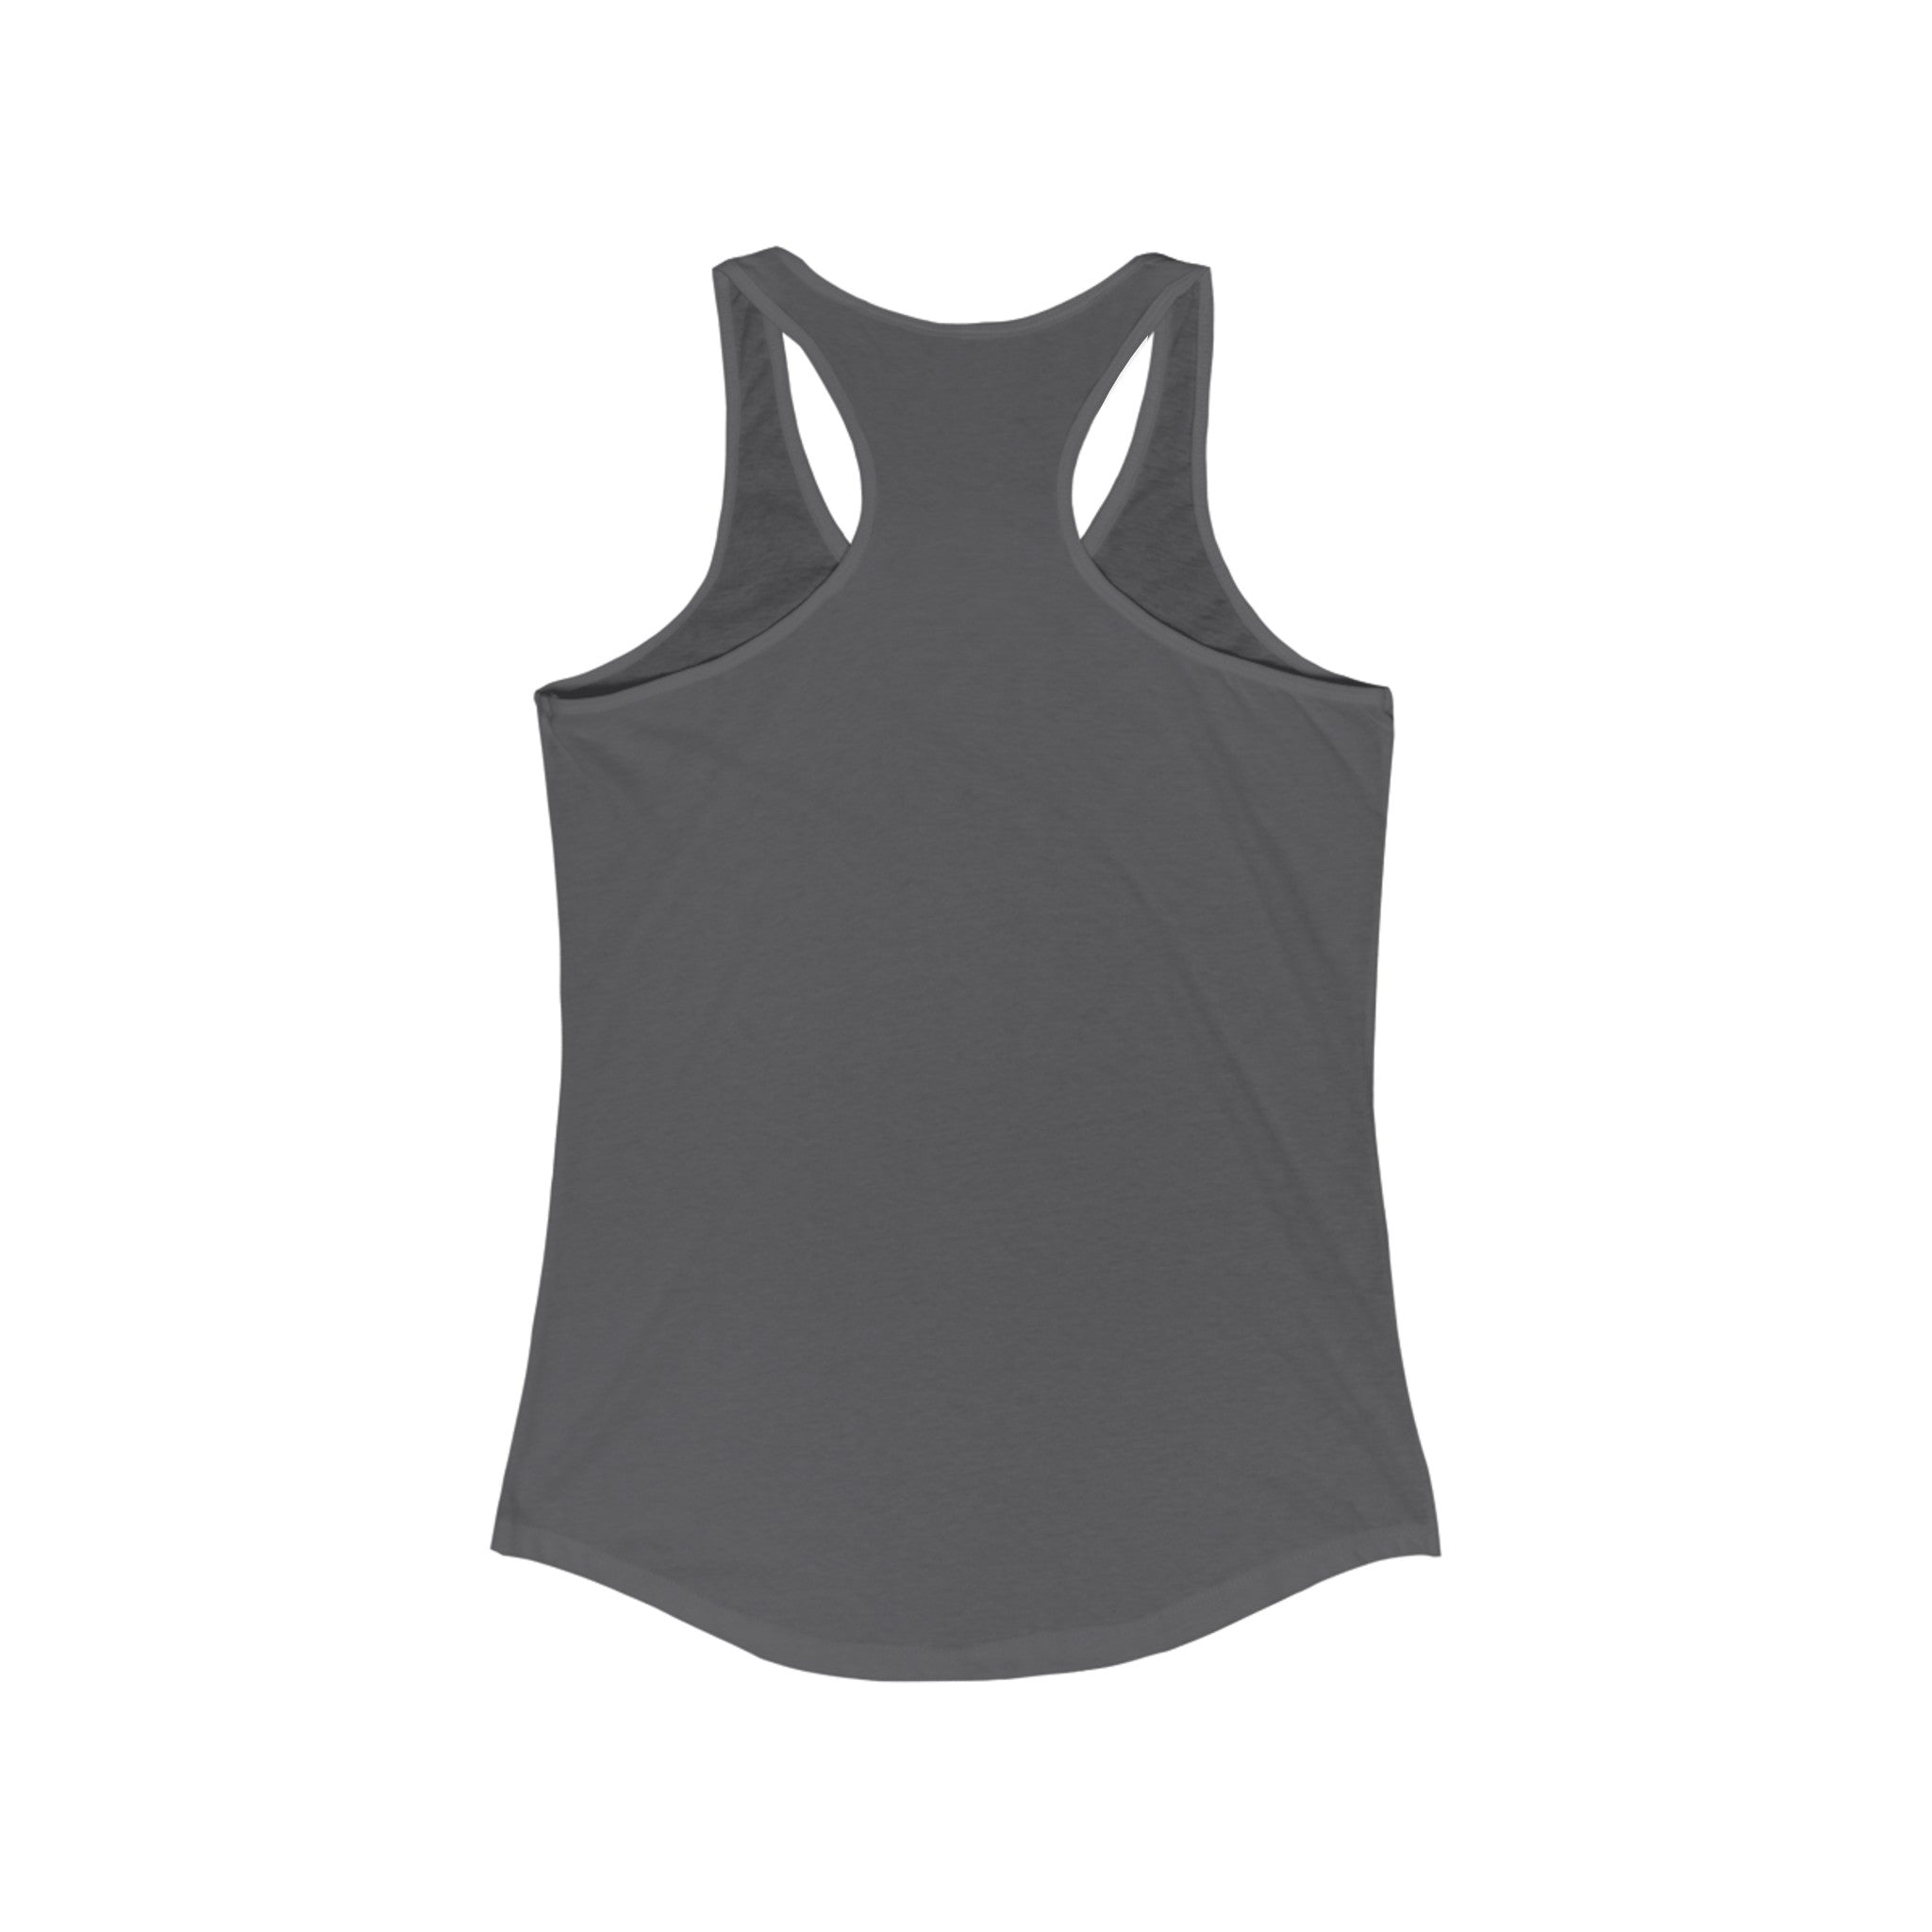 This dark gray He-He - Women's Racerback Tank, shown from the back, is perfect for an active lifestyle.